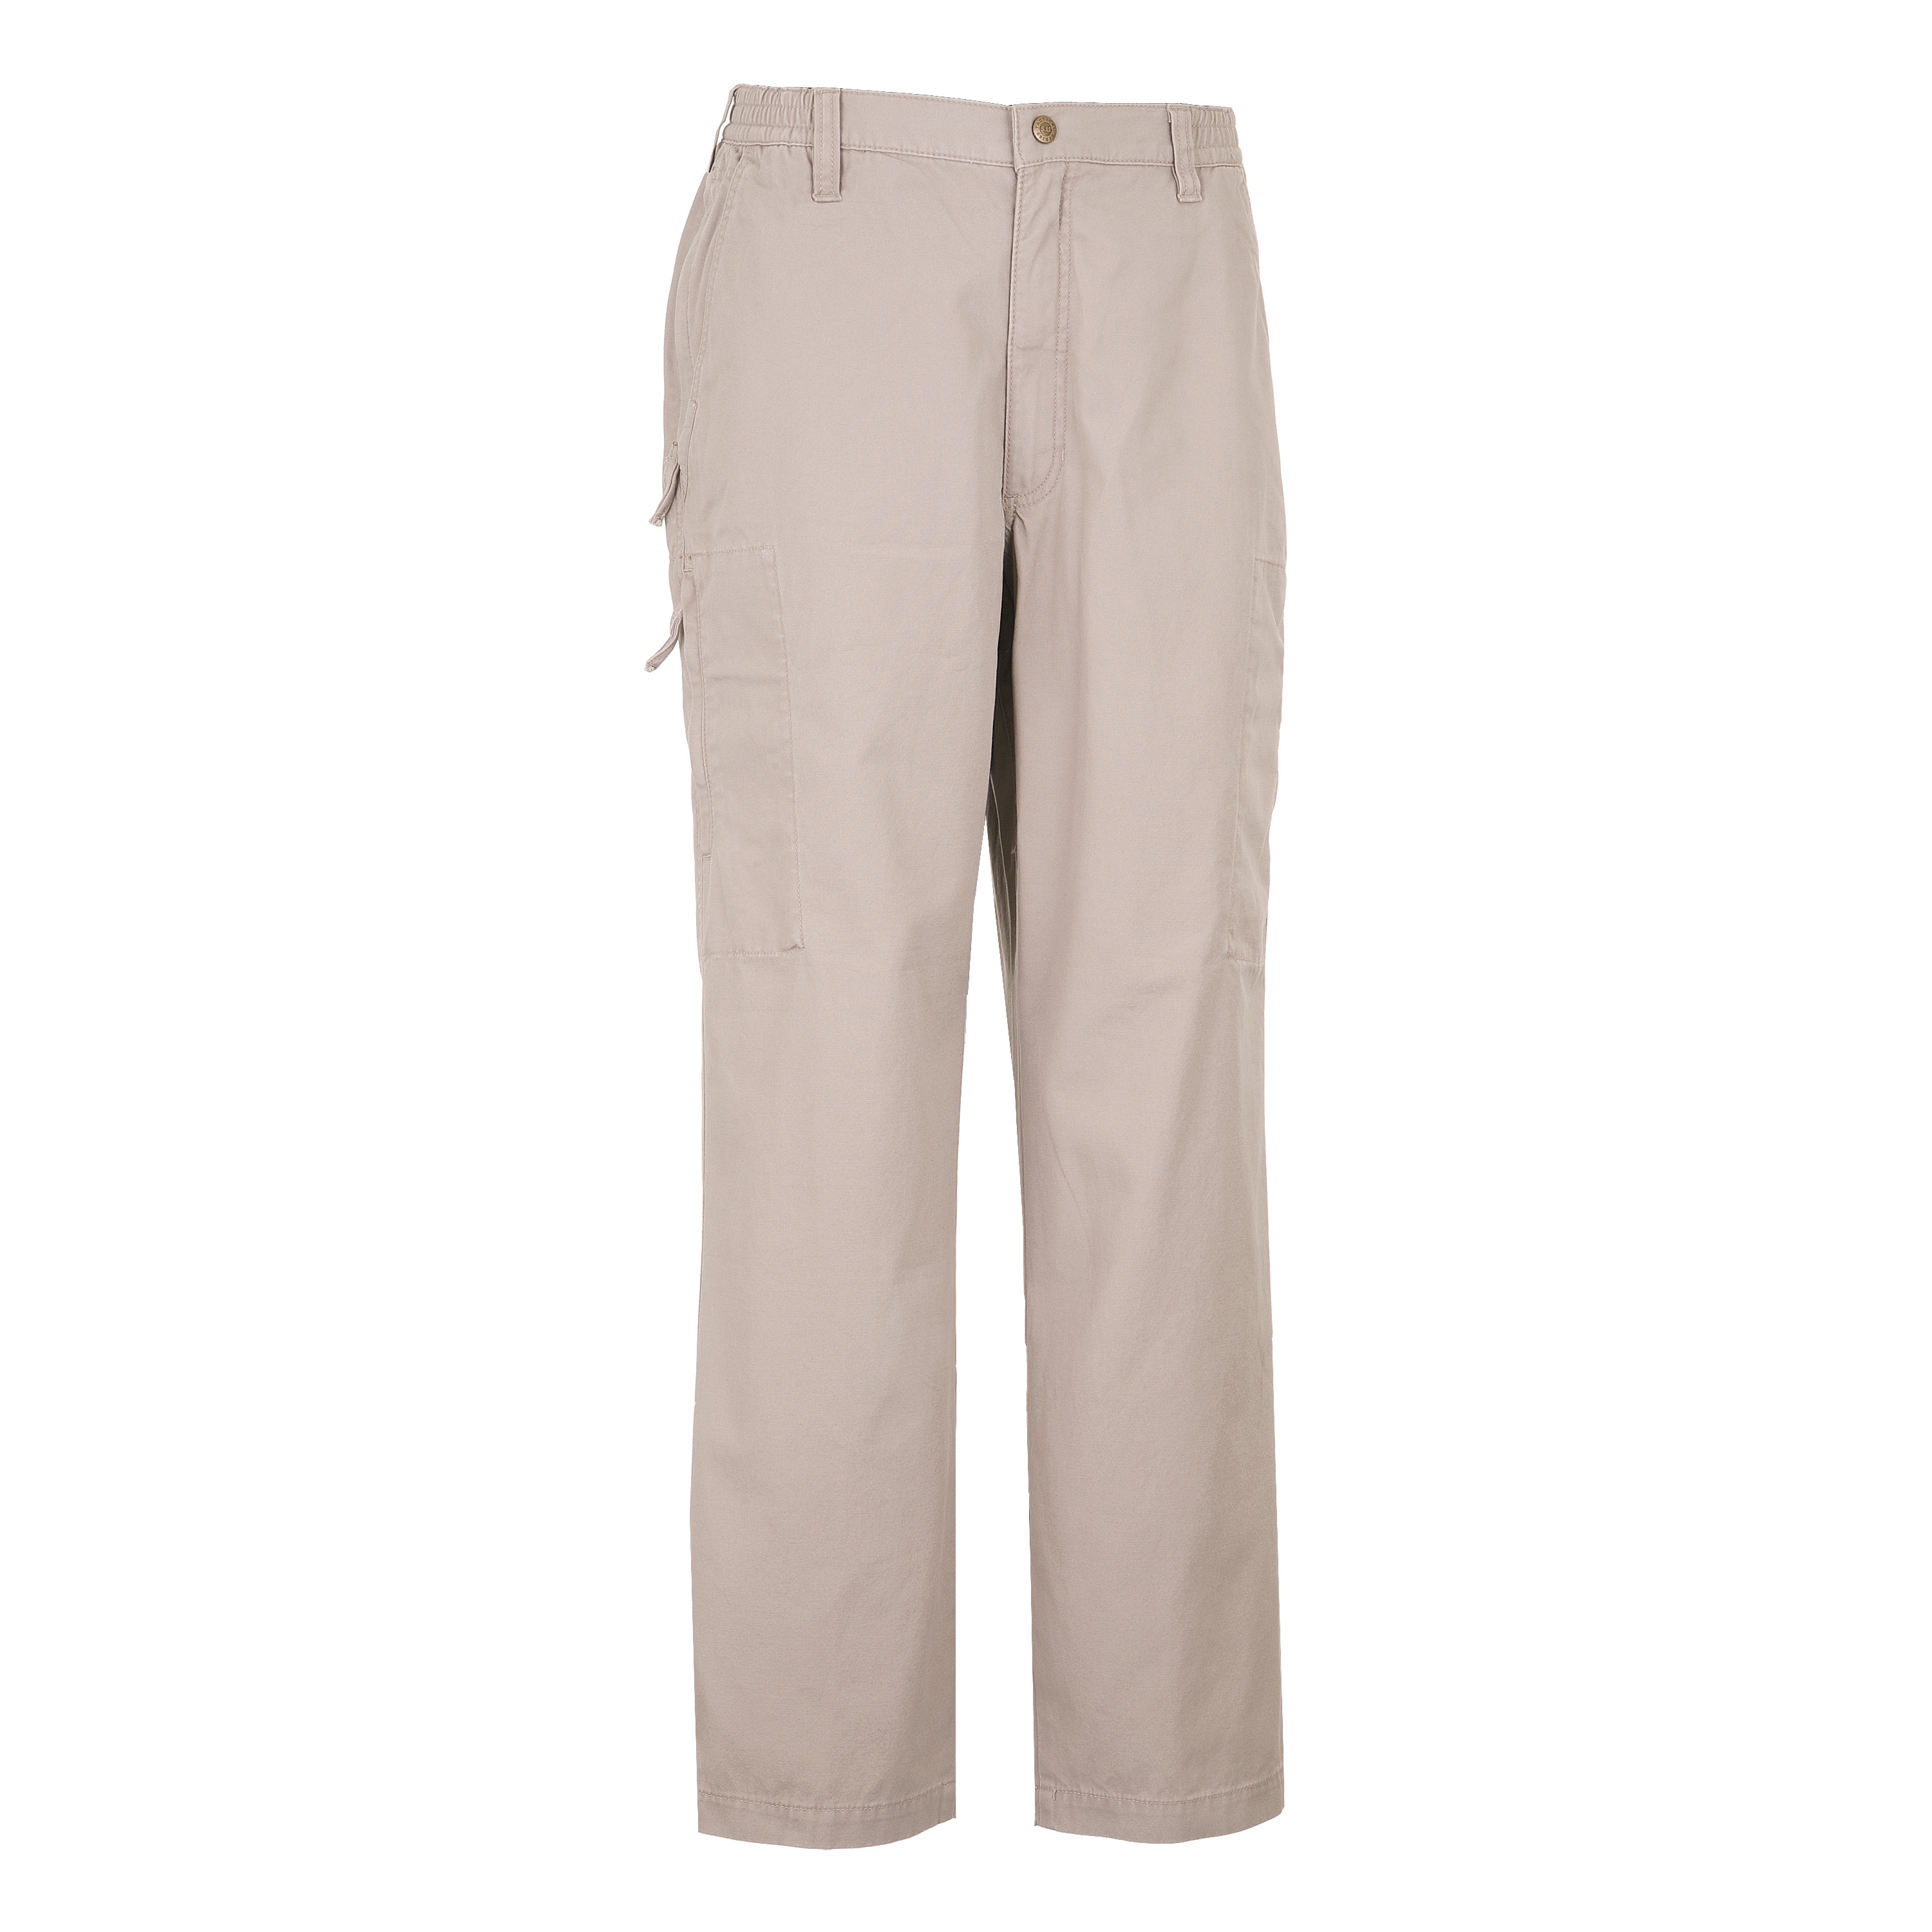 Buy 5.11 Tactical Men?s Ridgeline Covert Work Pants, Teflon Finish,  Poly-Cotton Ripstop Fabric, Storm, Style 74411 Online at Lowest Price Ever  in India | Check Reviews & Ratings - Shop The World